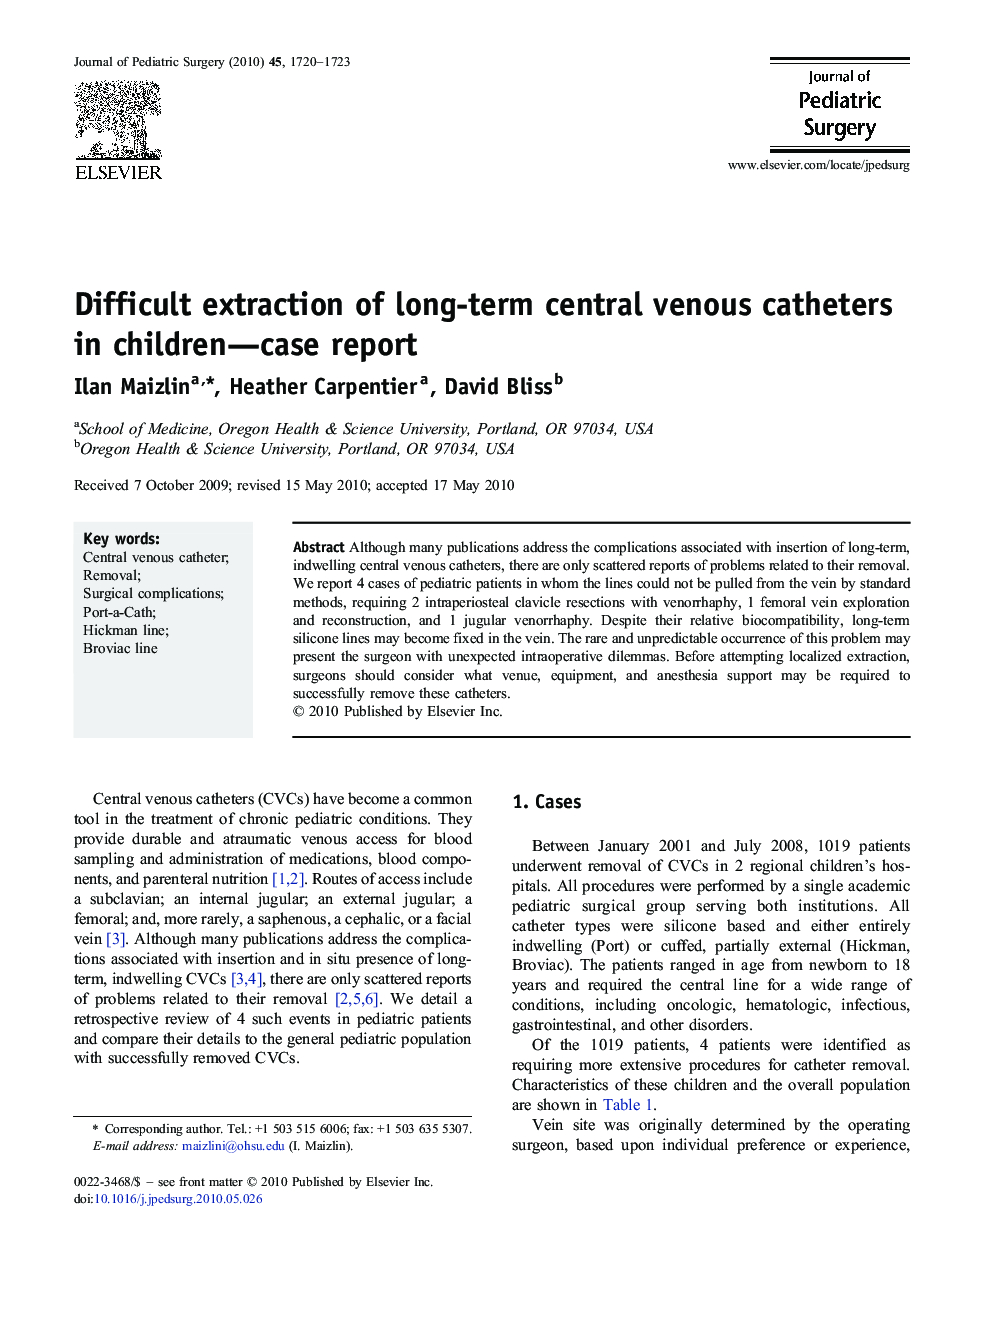 Difficult extraction of long-term central venous catheters in children—case report